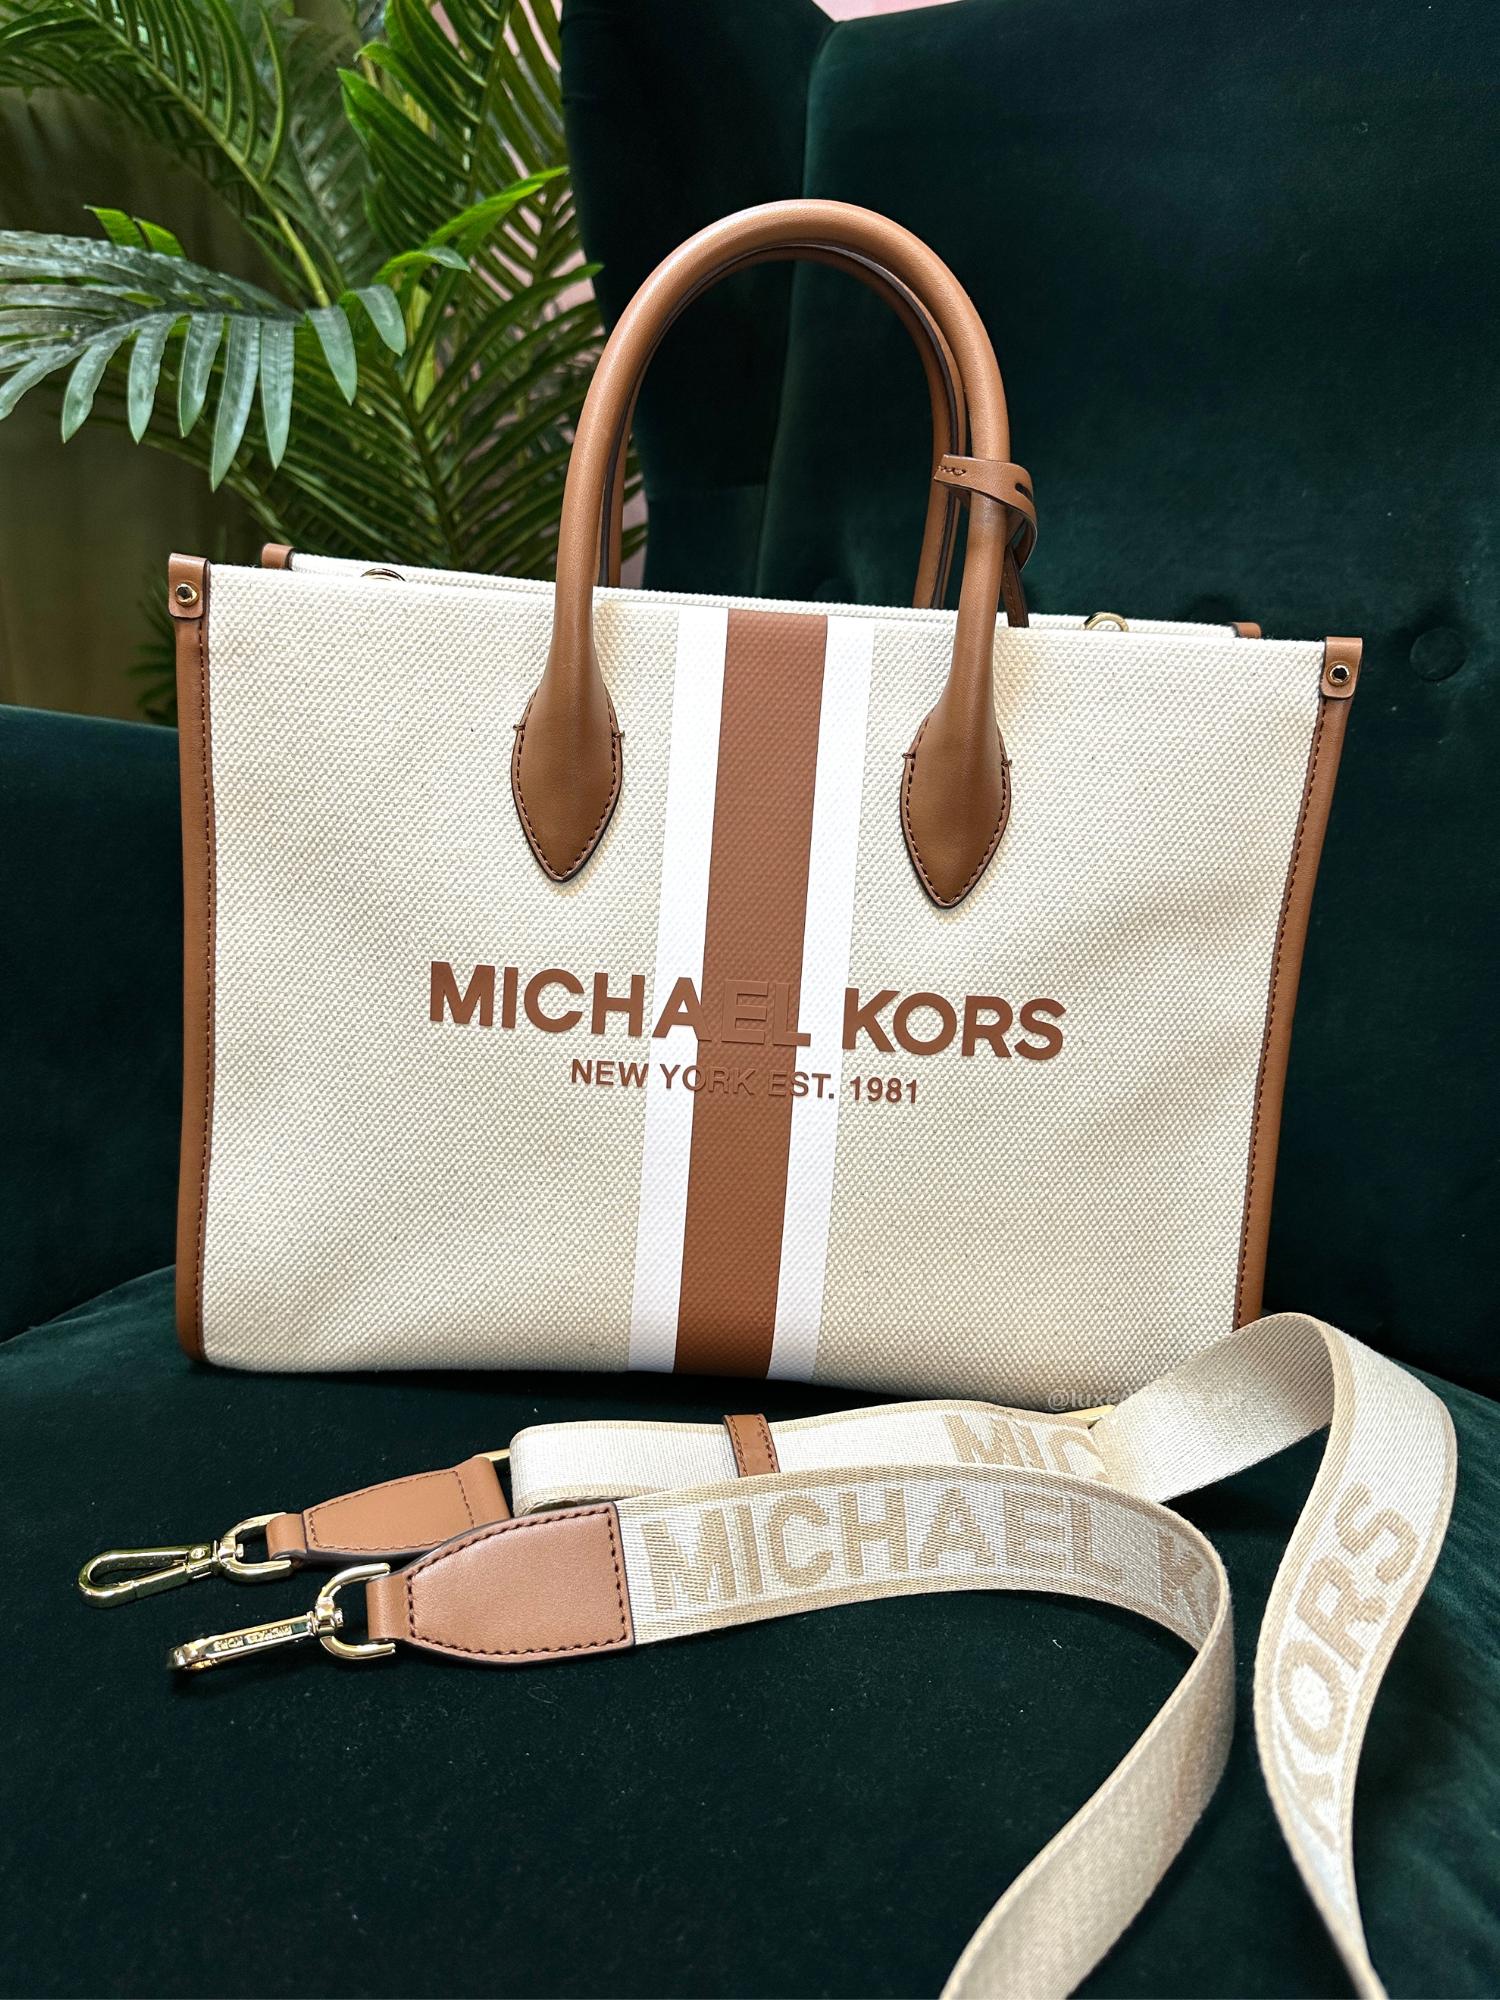 MICHAEL KORS Blakely Large Canvas Tote Bag- Natural New w/Tags